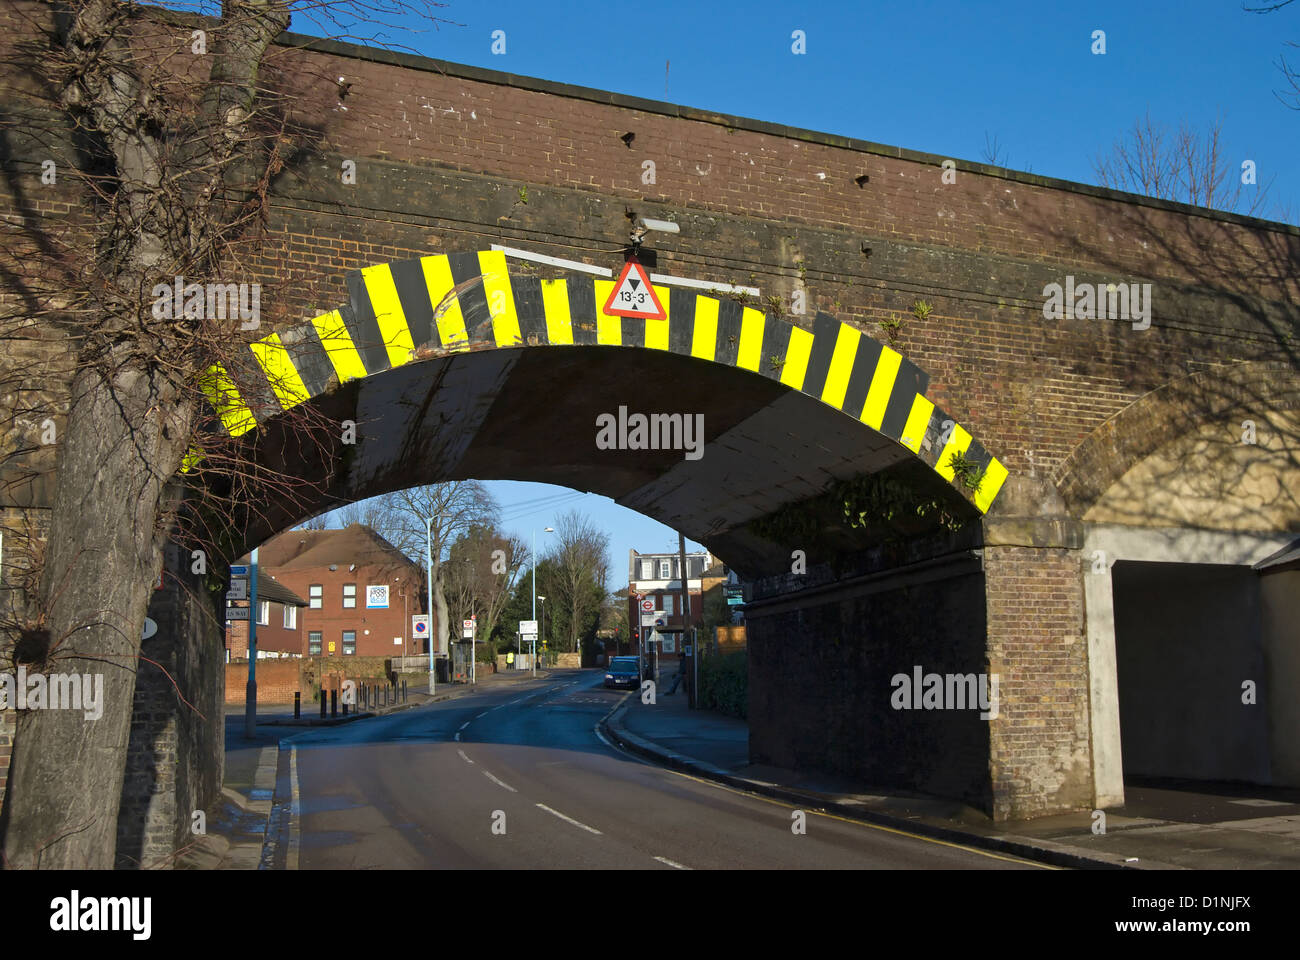 low bridge with height sign and hazard warning markings, isleworth, middlesex, england Stock Photo